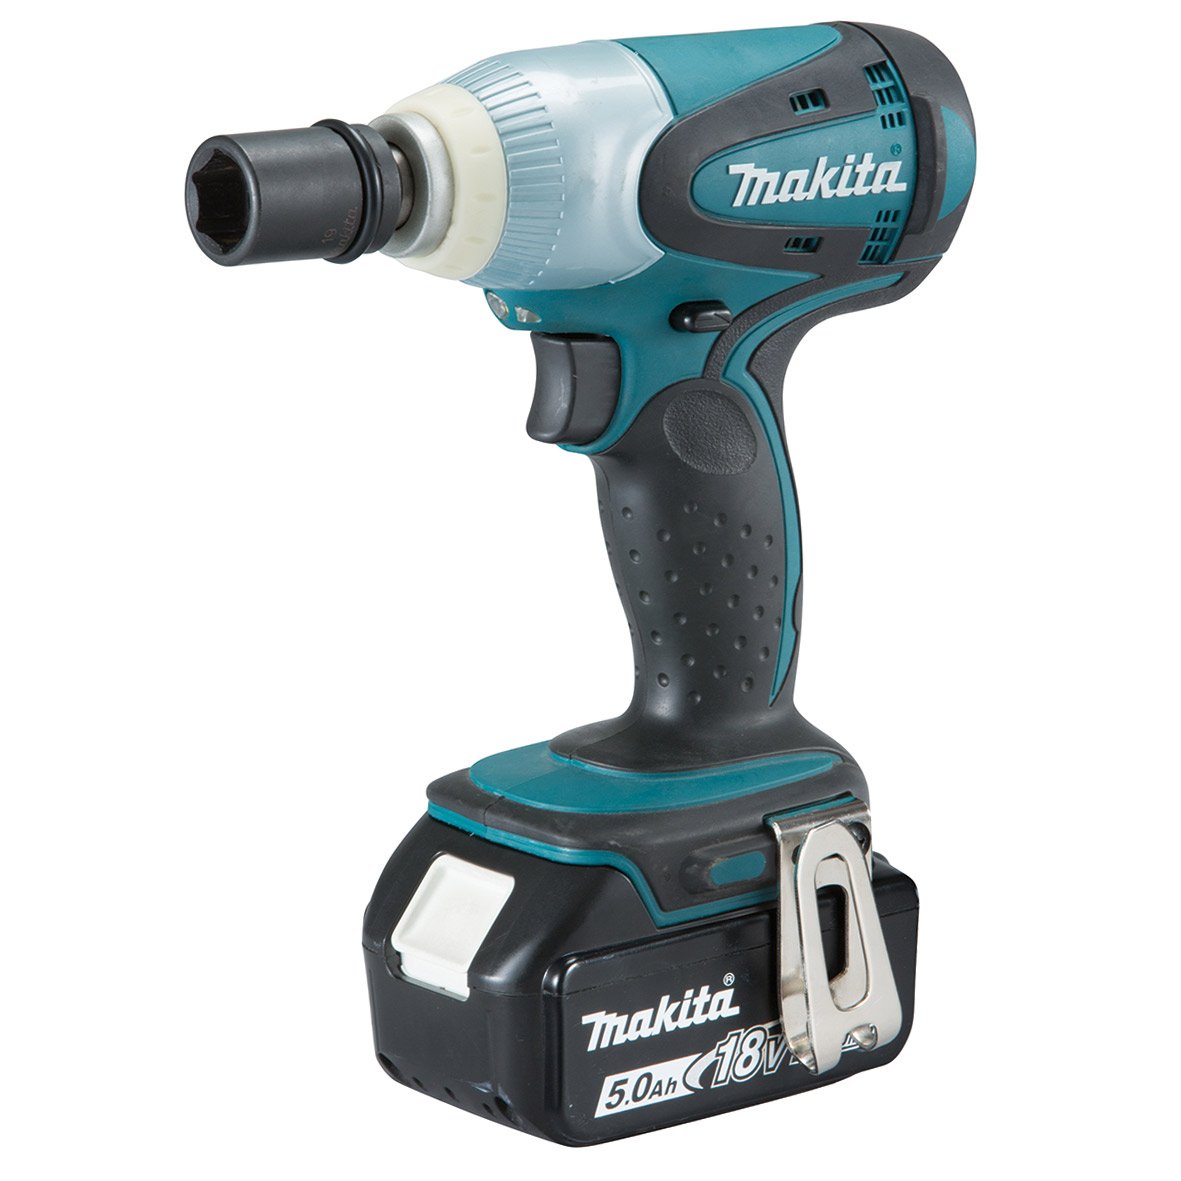 Makita Cordless Impact Wrench DTW251RFE Rapid Charger (DC18RC), 2 x 18V 3.0Ah Batteries (BL1830B)